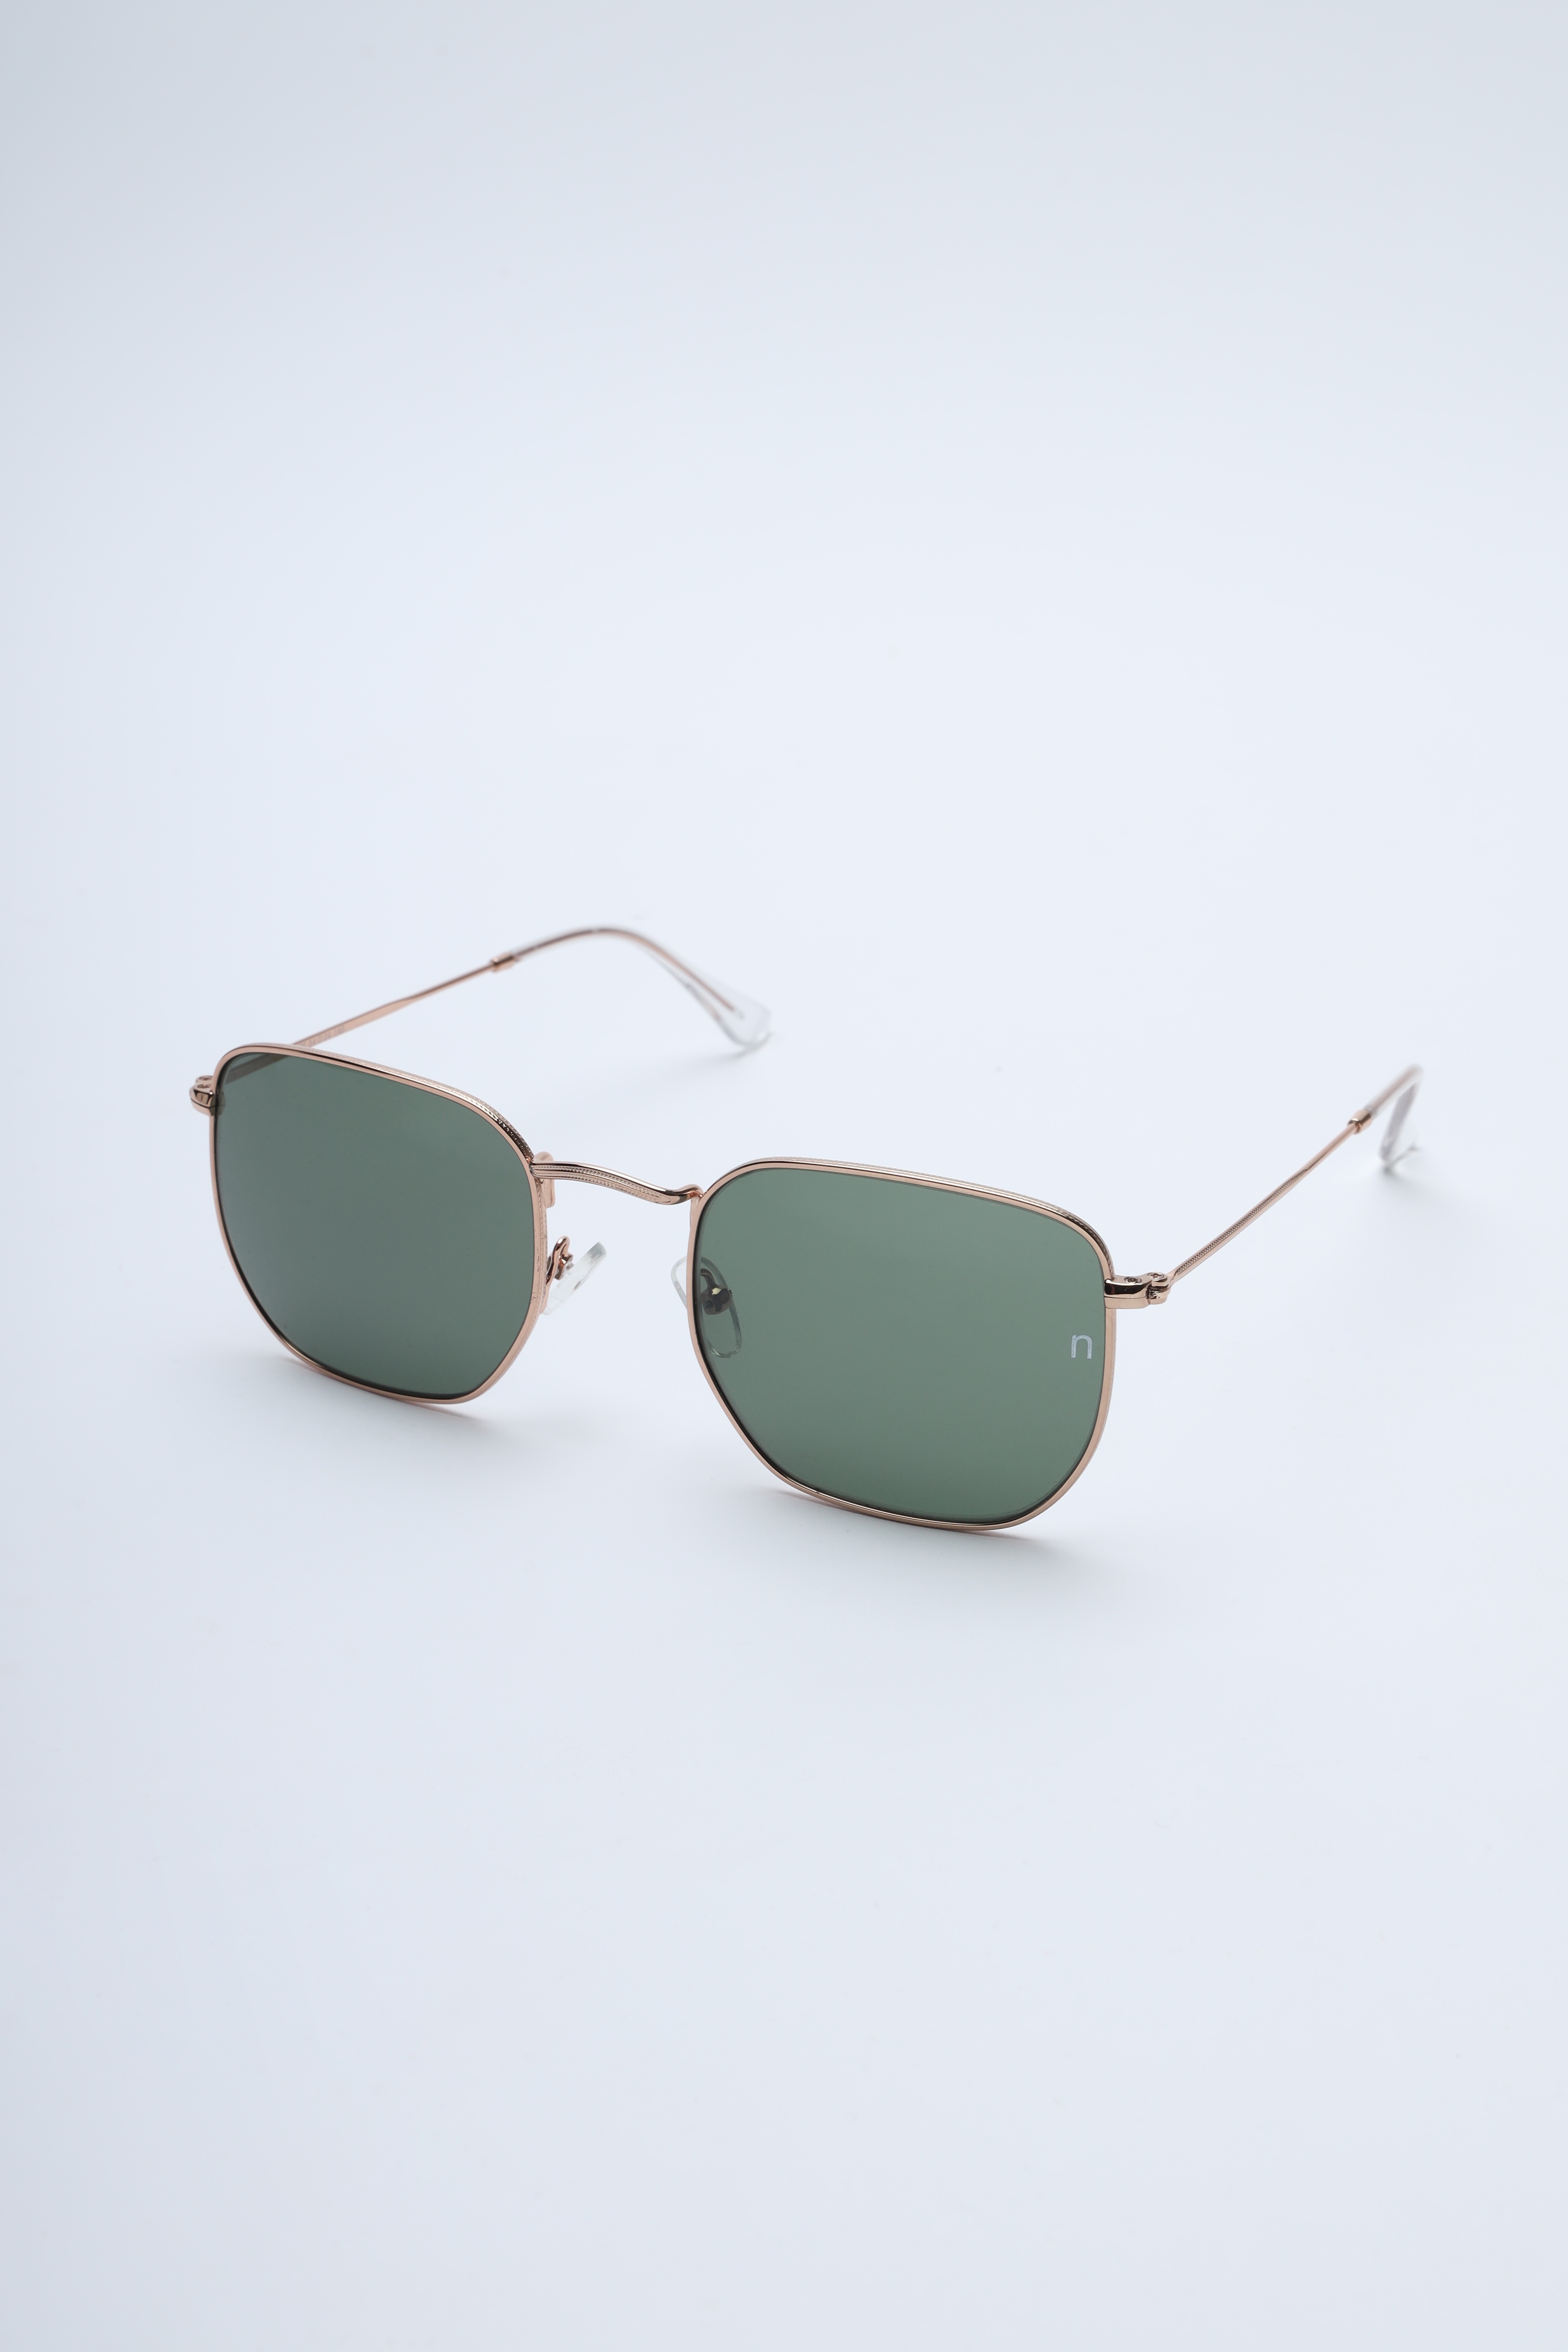 Noggah | Noggah Stainless Steel Gold Frame with Green Glass UV Protection Lens  Large Size Unisex Sunglasses 